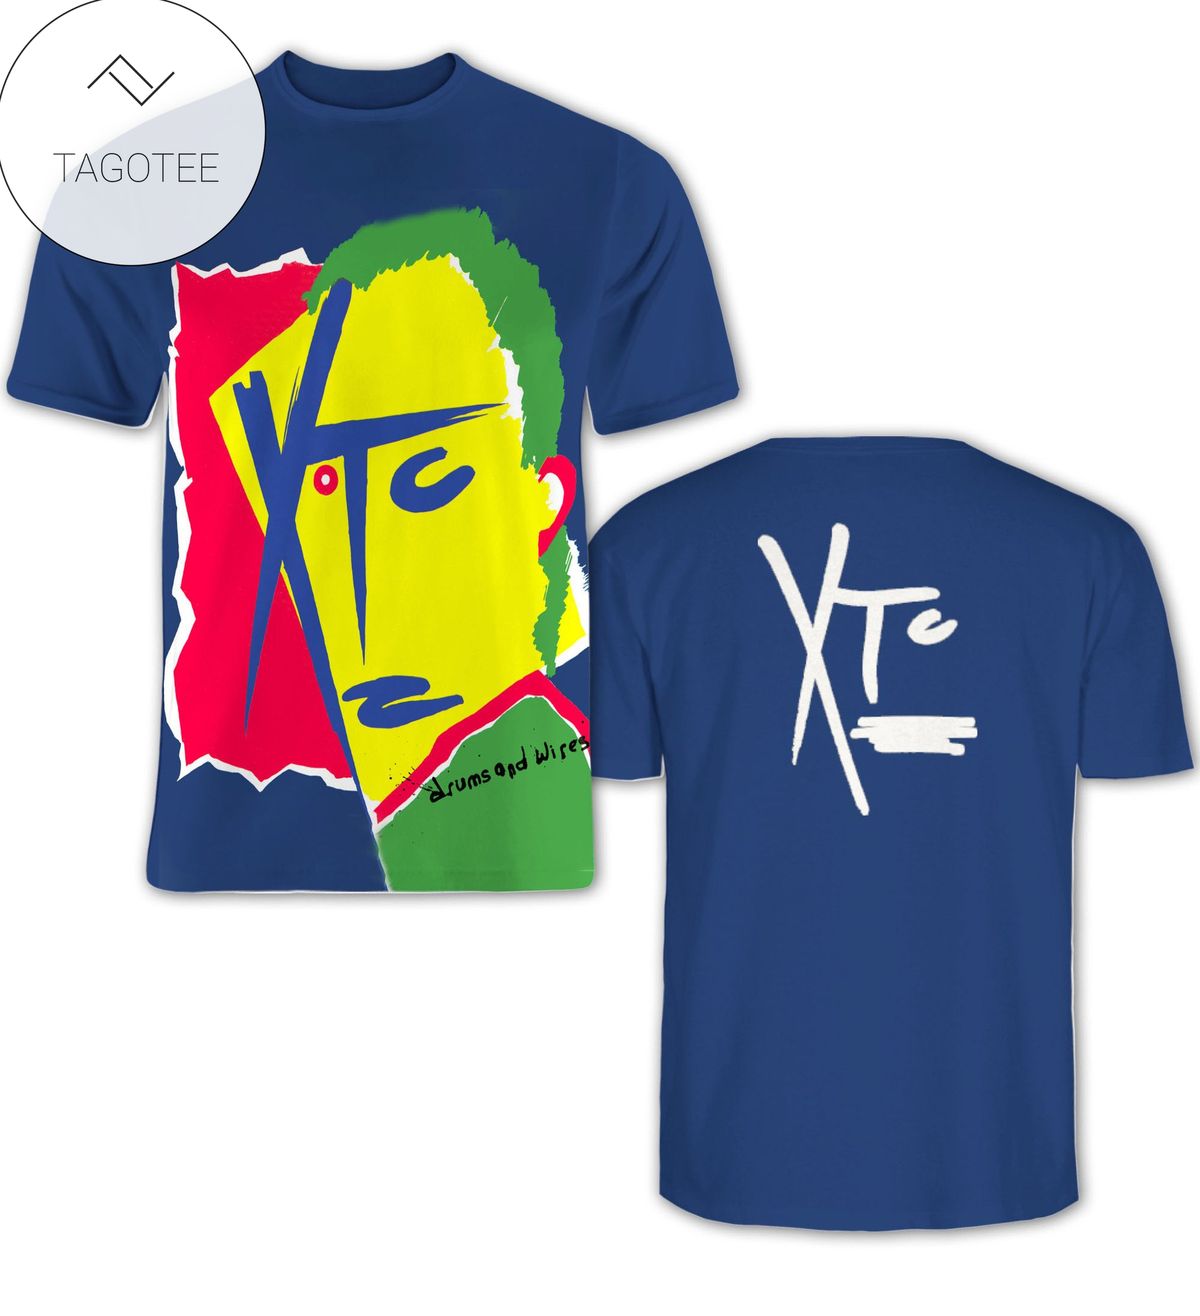 XTC Drums And Wires Album Cover Shirt